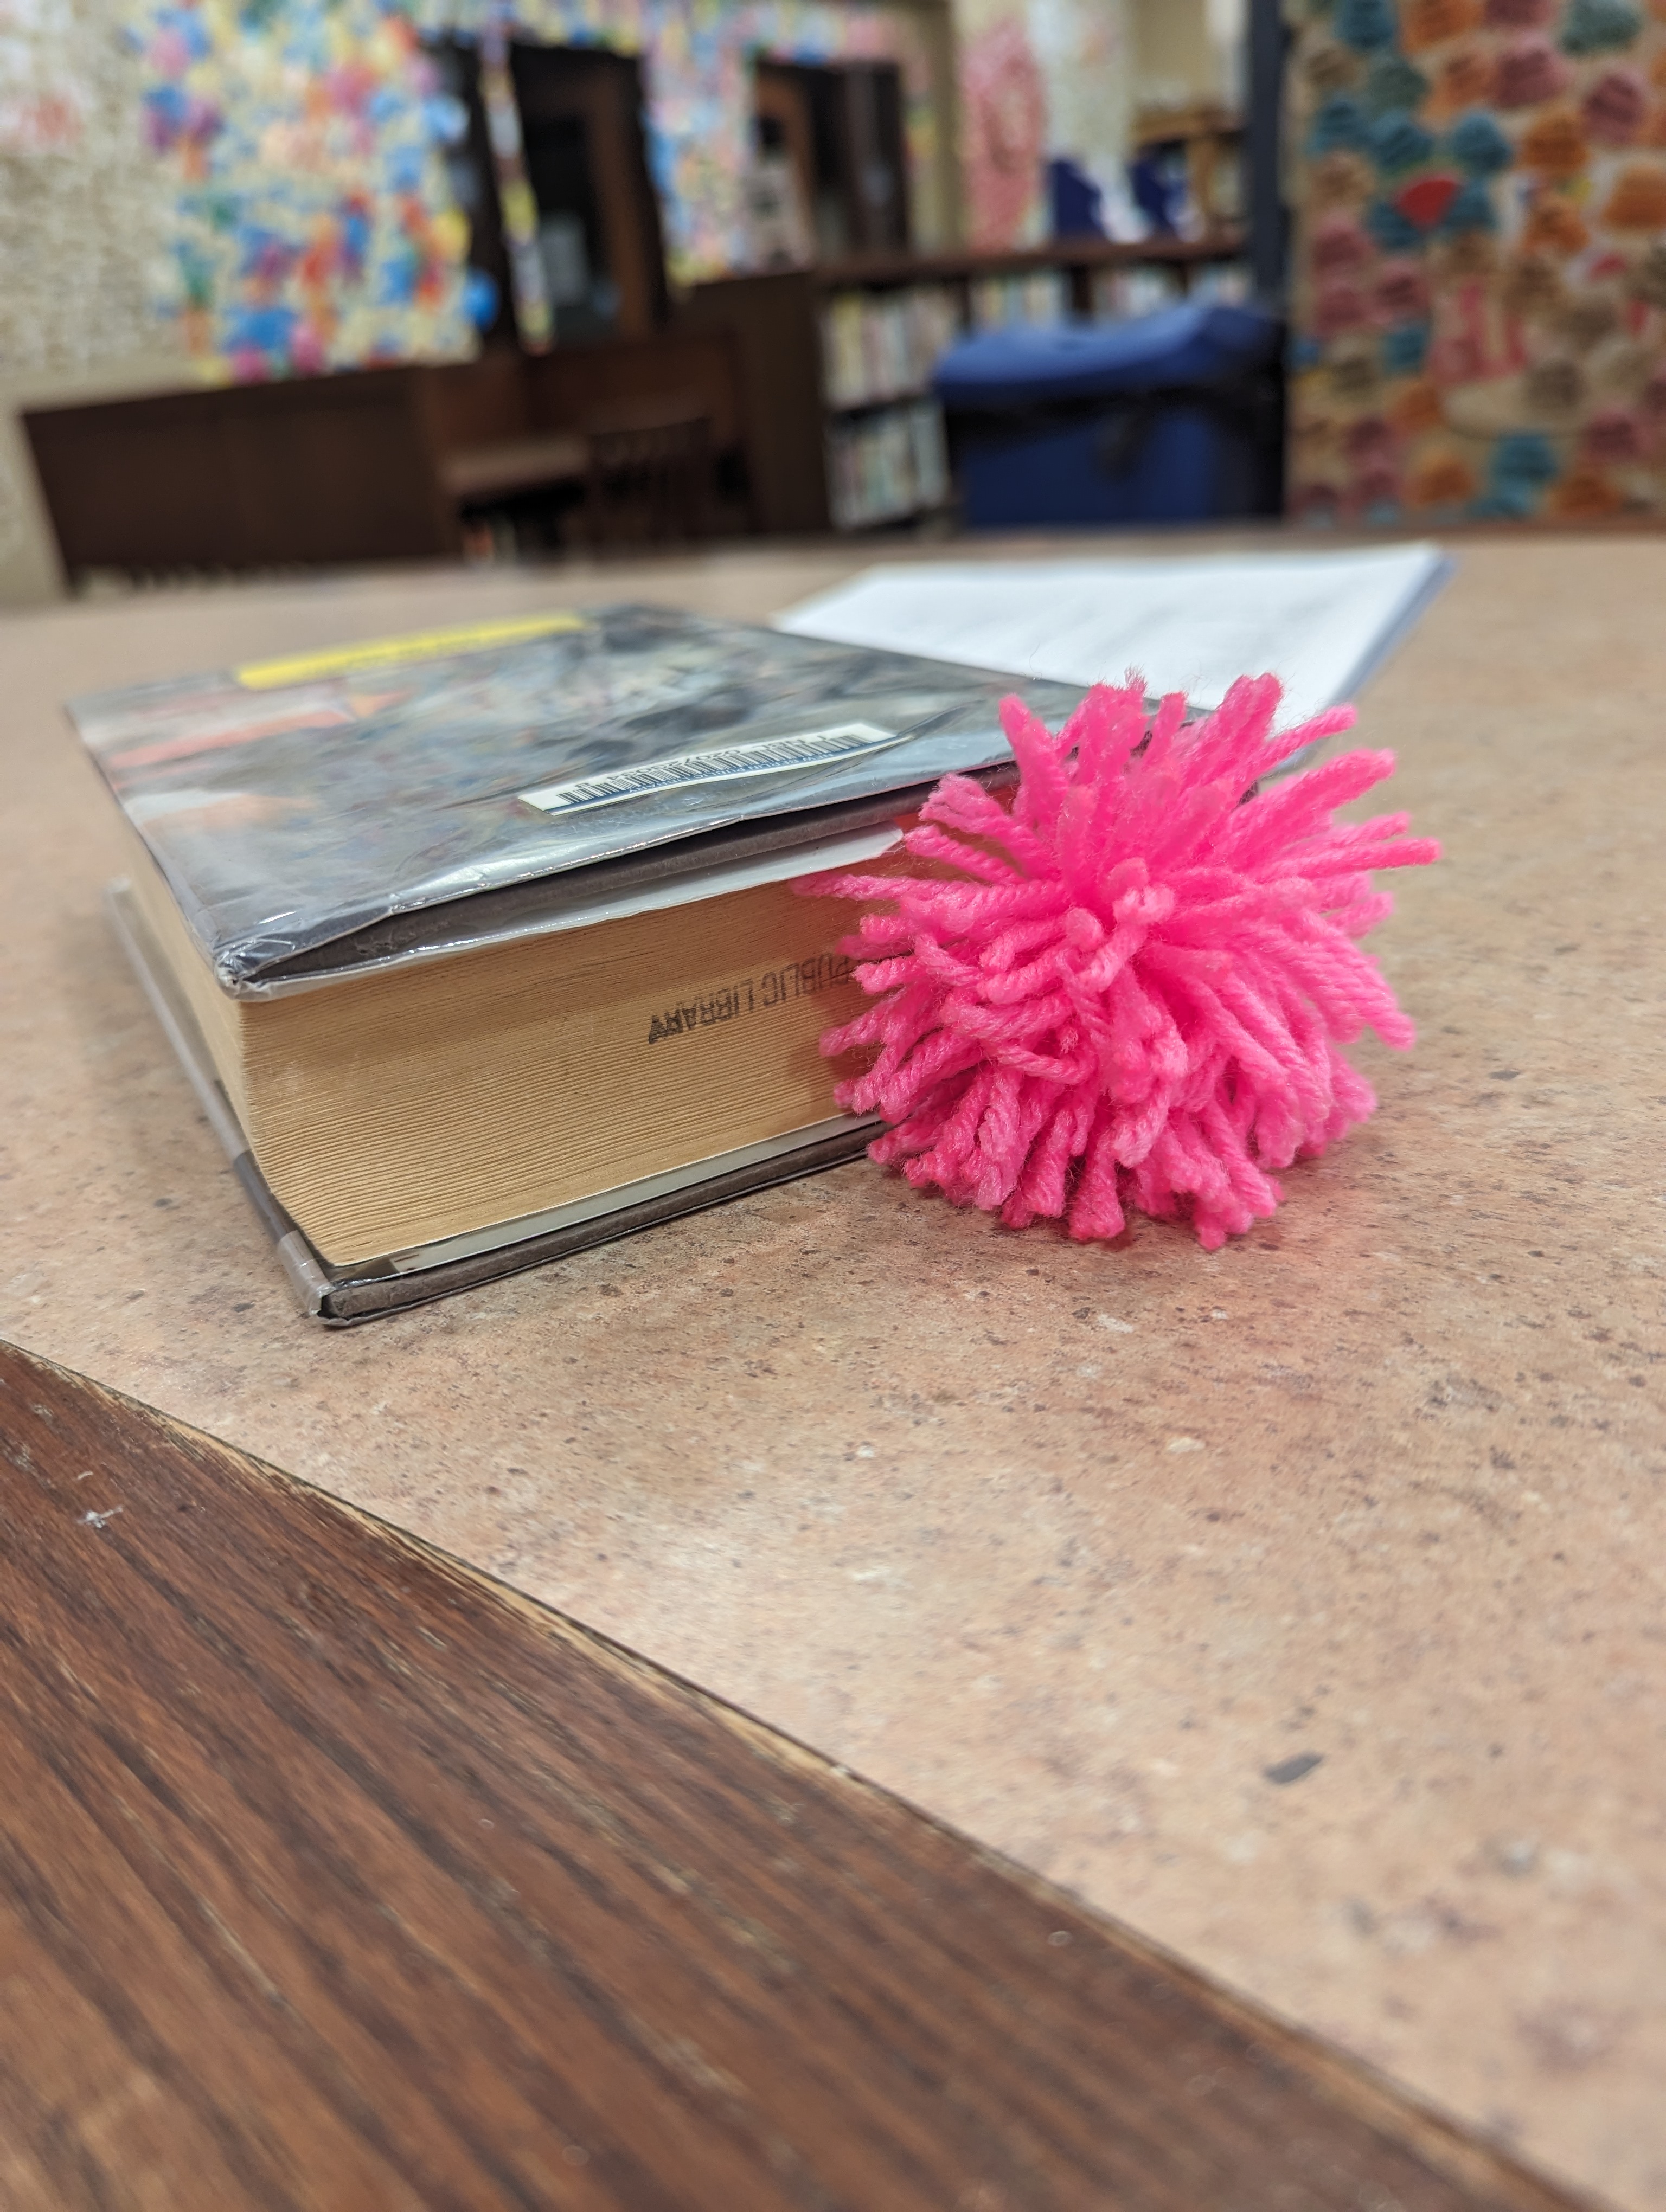 pom pom book mark made out of pink yarn sticking out of a chapter book